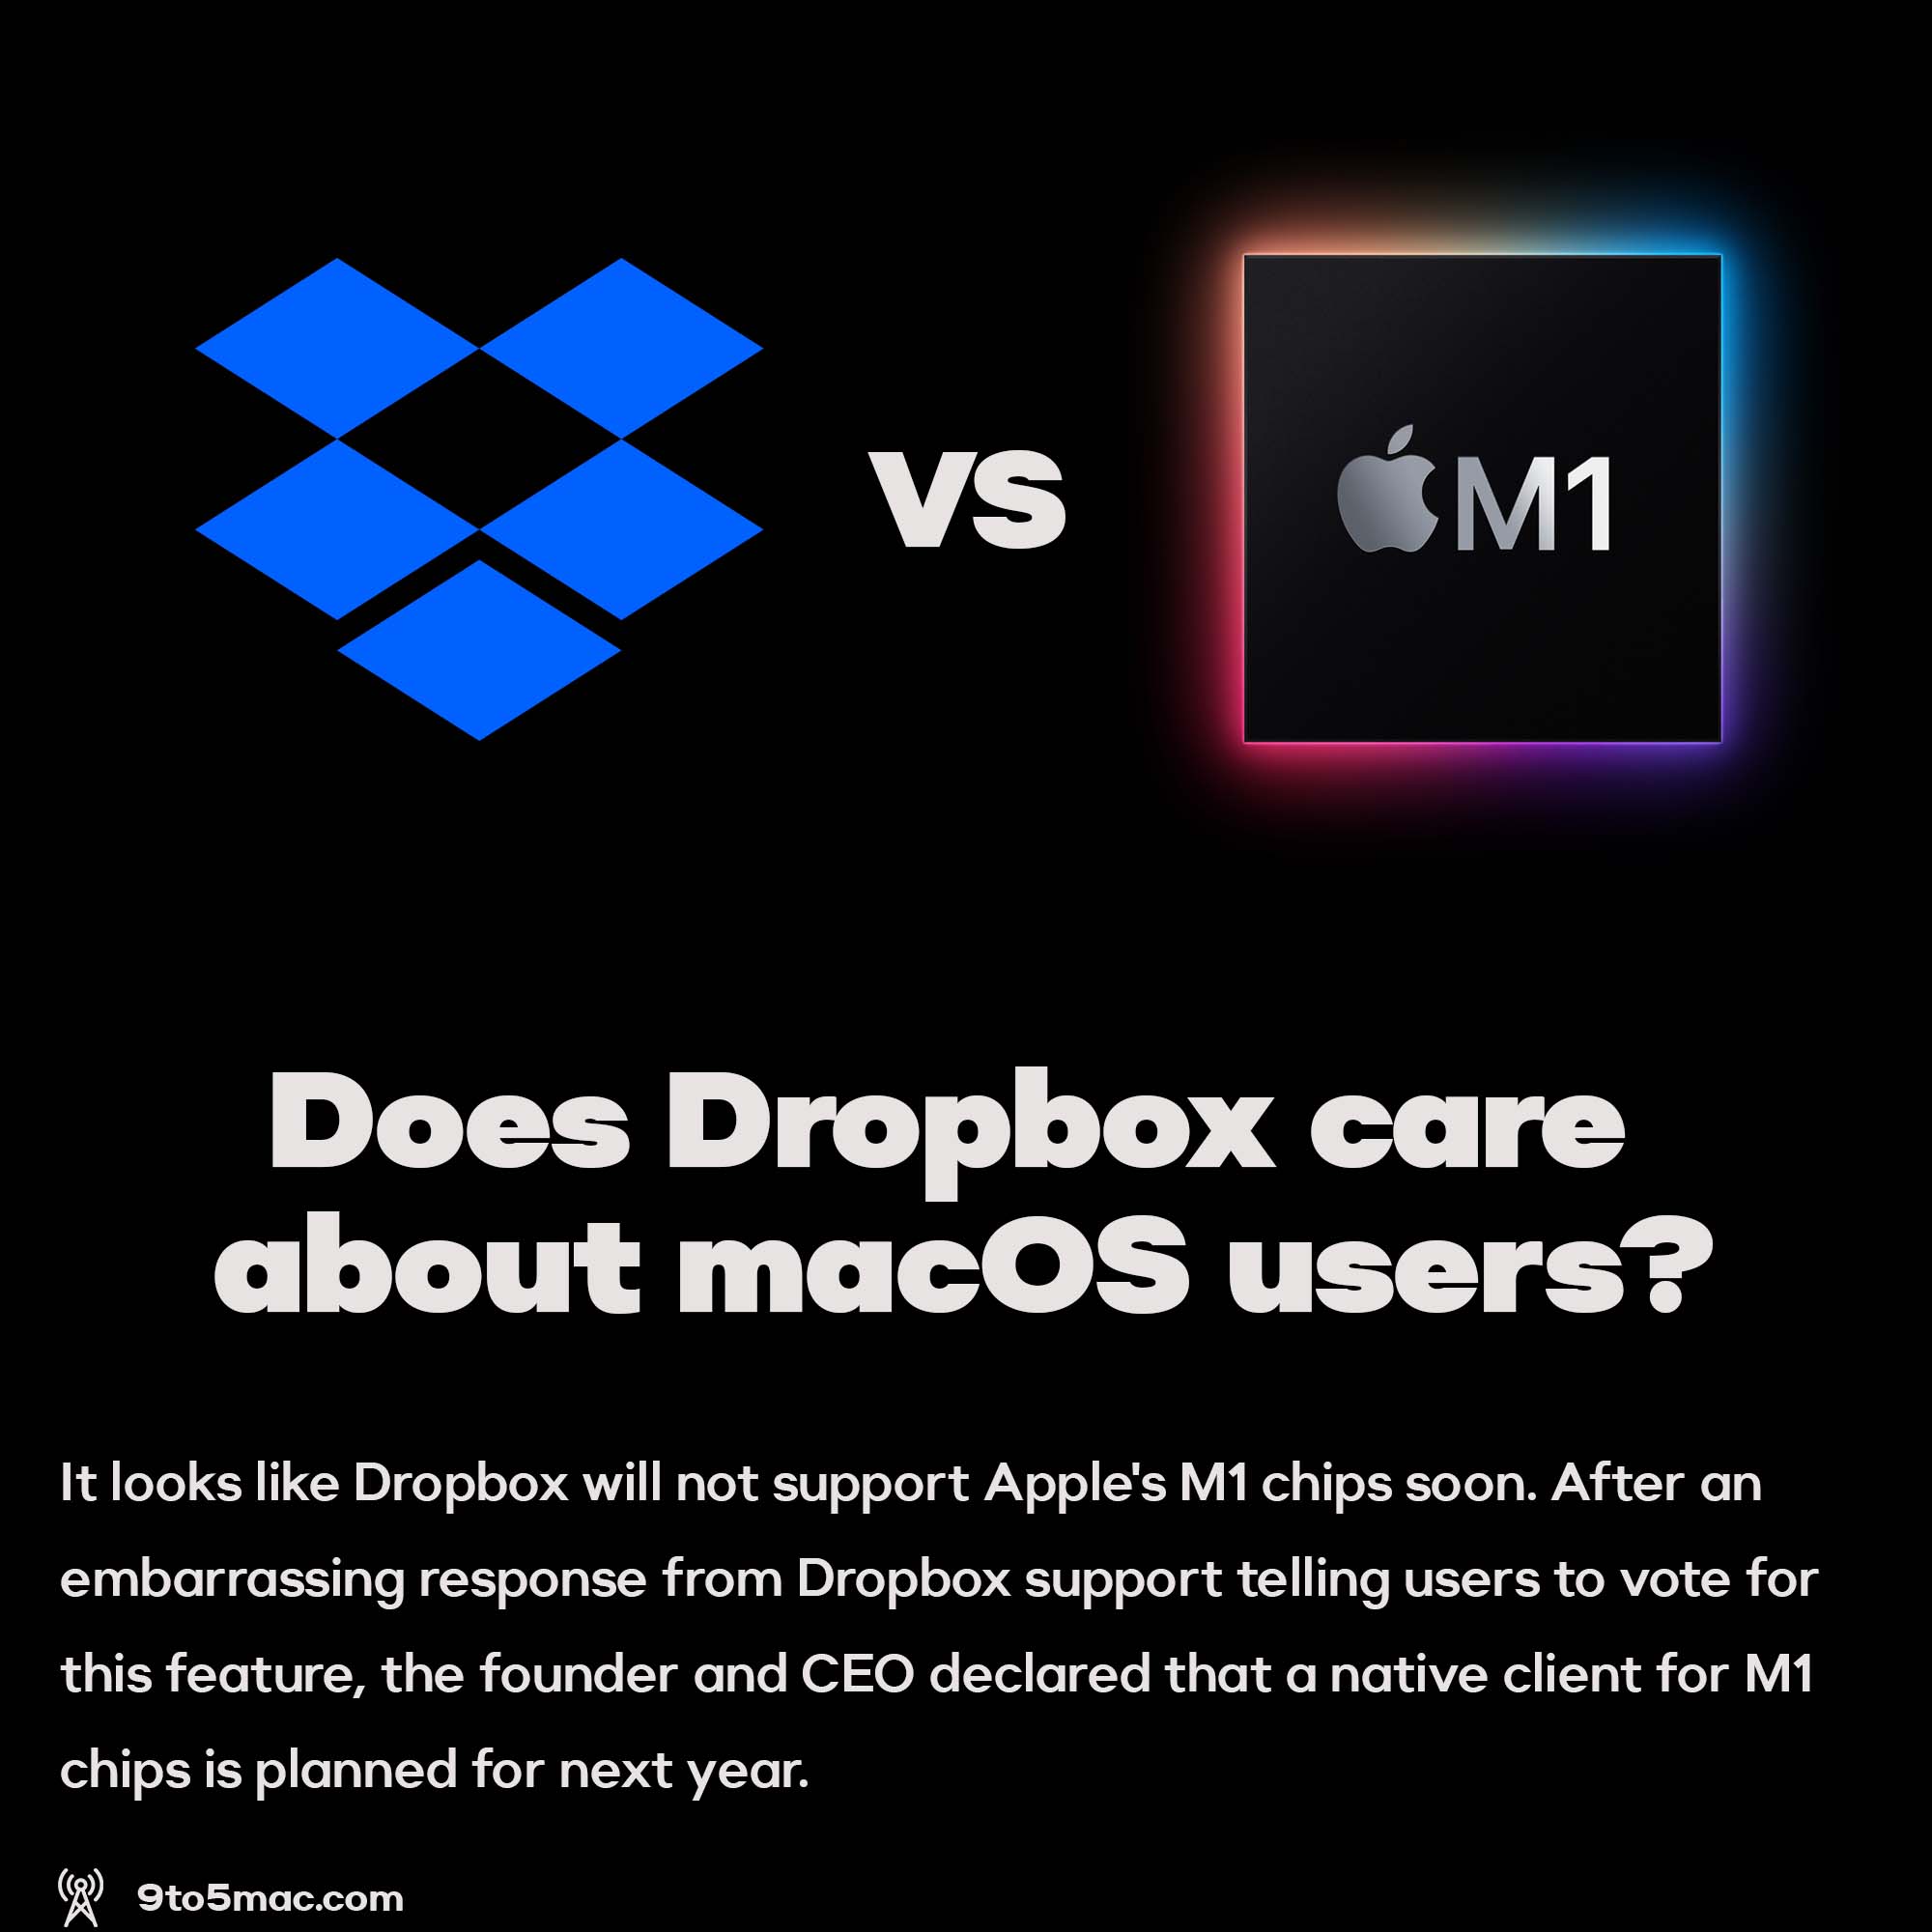 We will not see native Dropbox client for Apple's M1 chips soon